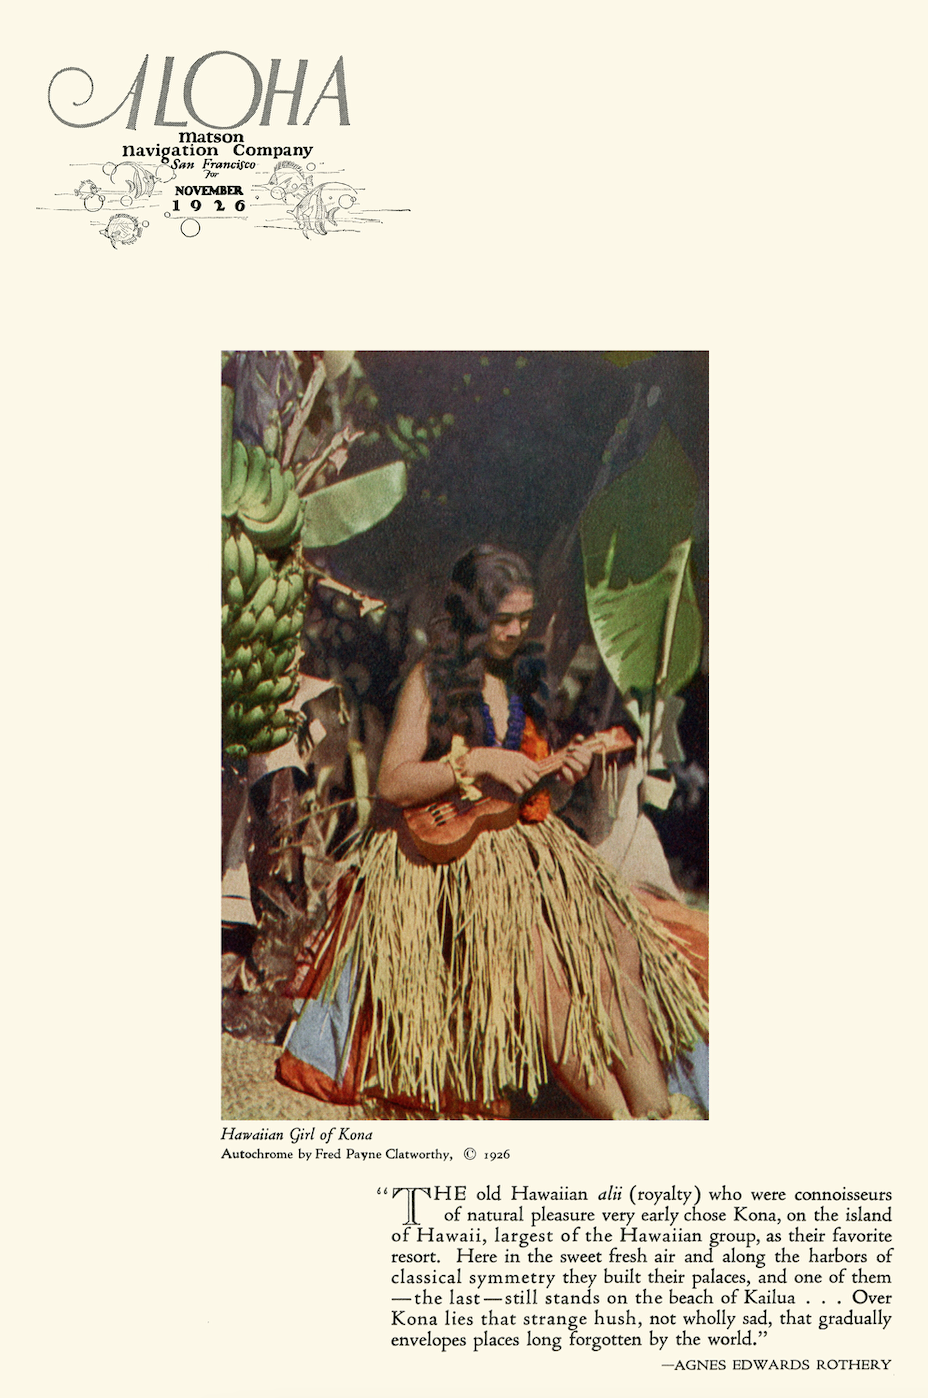 Aloha Magazine cover with full color photo of a Hawaiian girl wearing a grass skirt while sitting and holding an ukulele. There is a paragraph of text below the image.